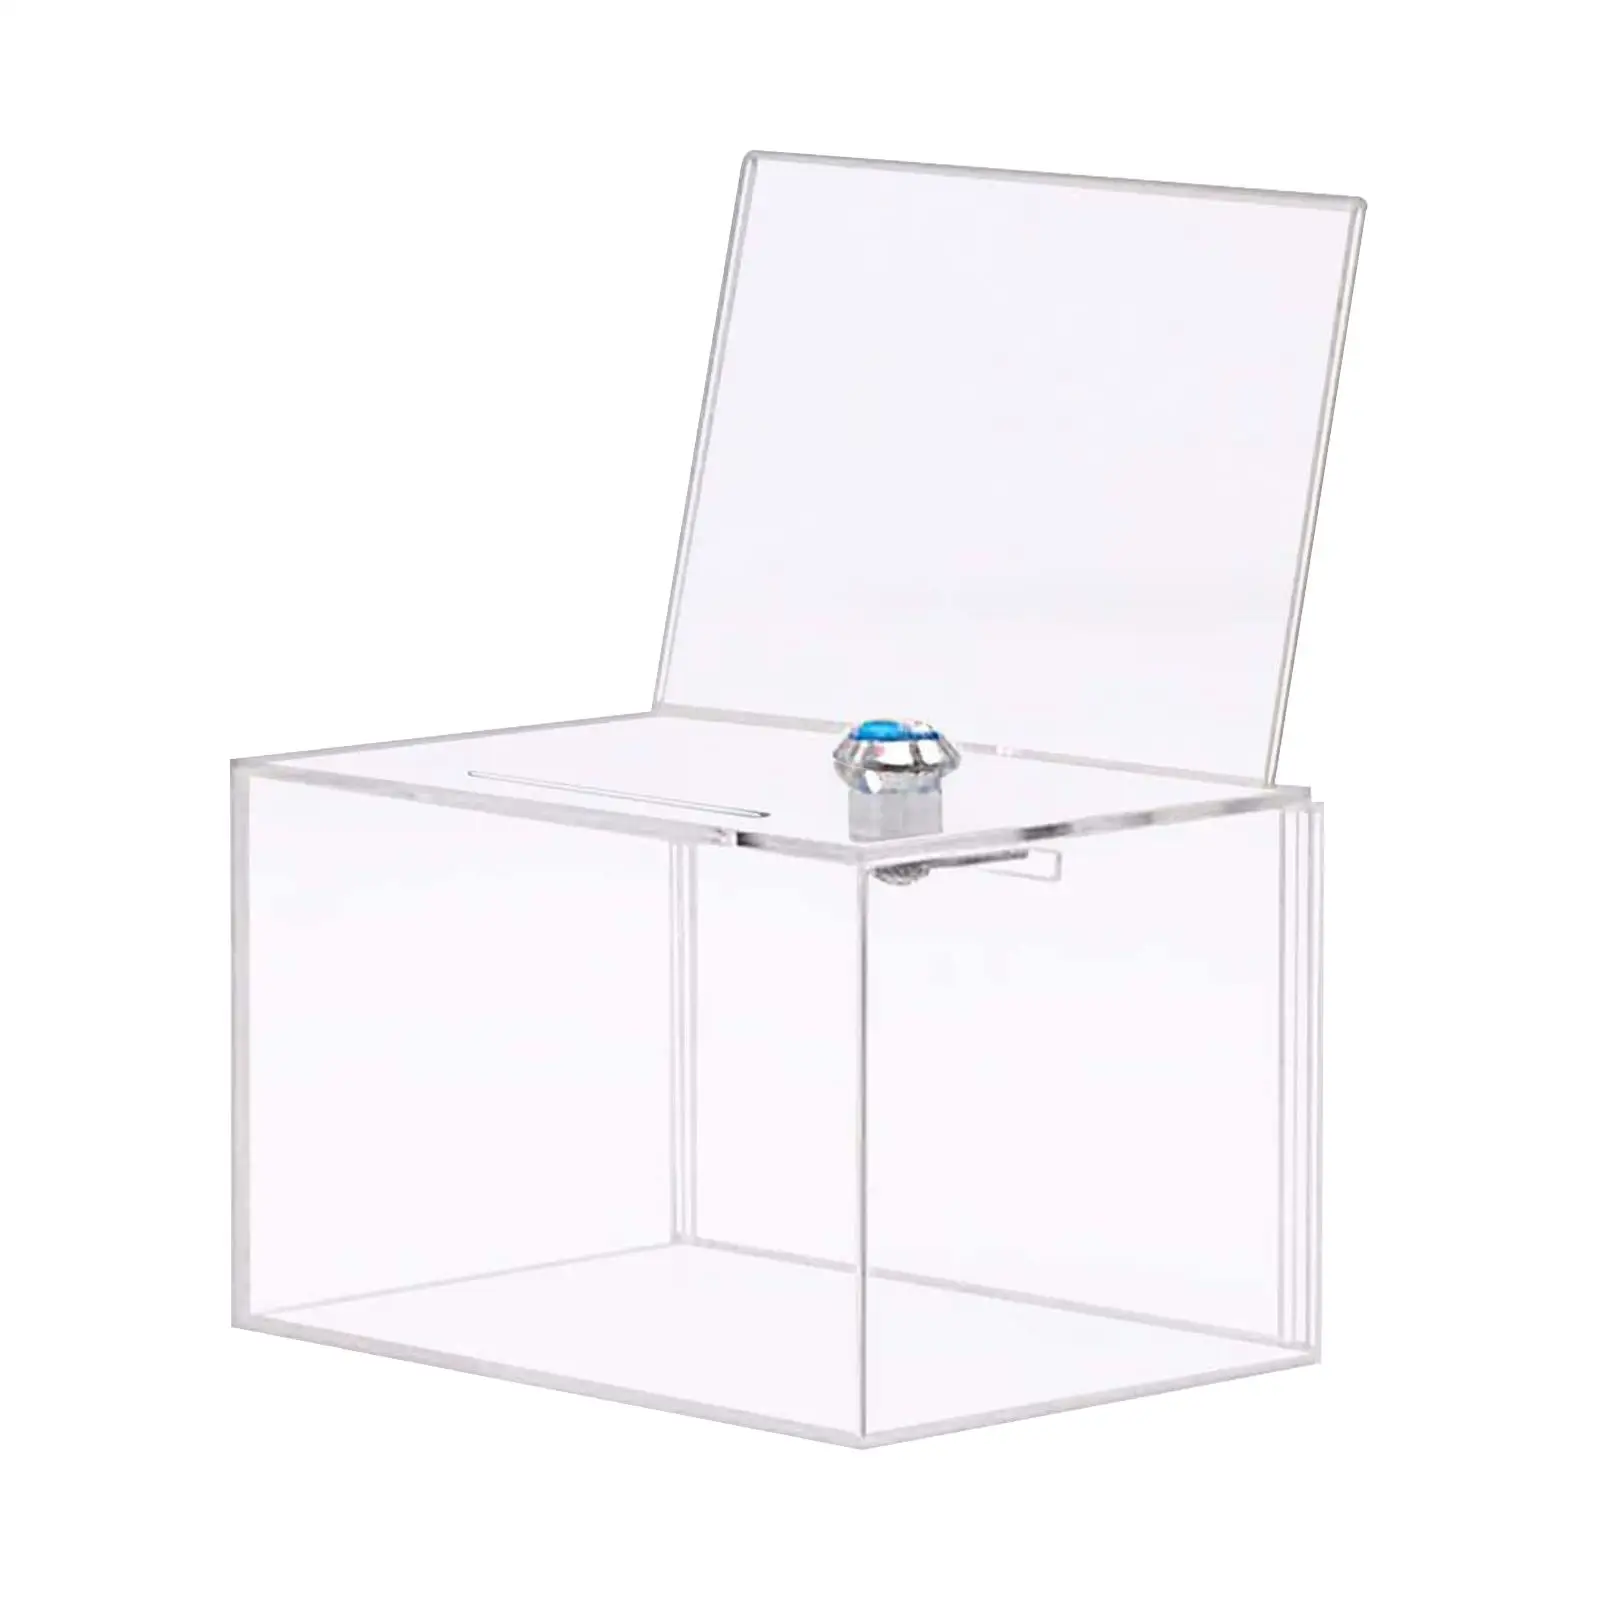 Acrylic Donation Case Clear with Lock Collecting Opinion Raffle Ticket Box Raffle Box for Business Reception Community Events